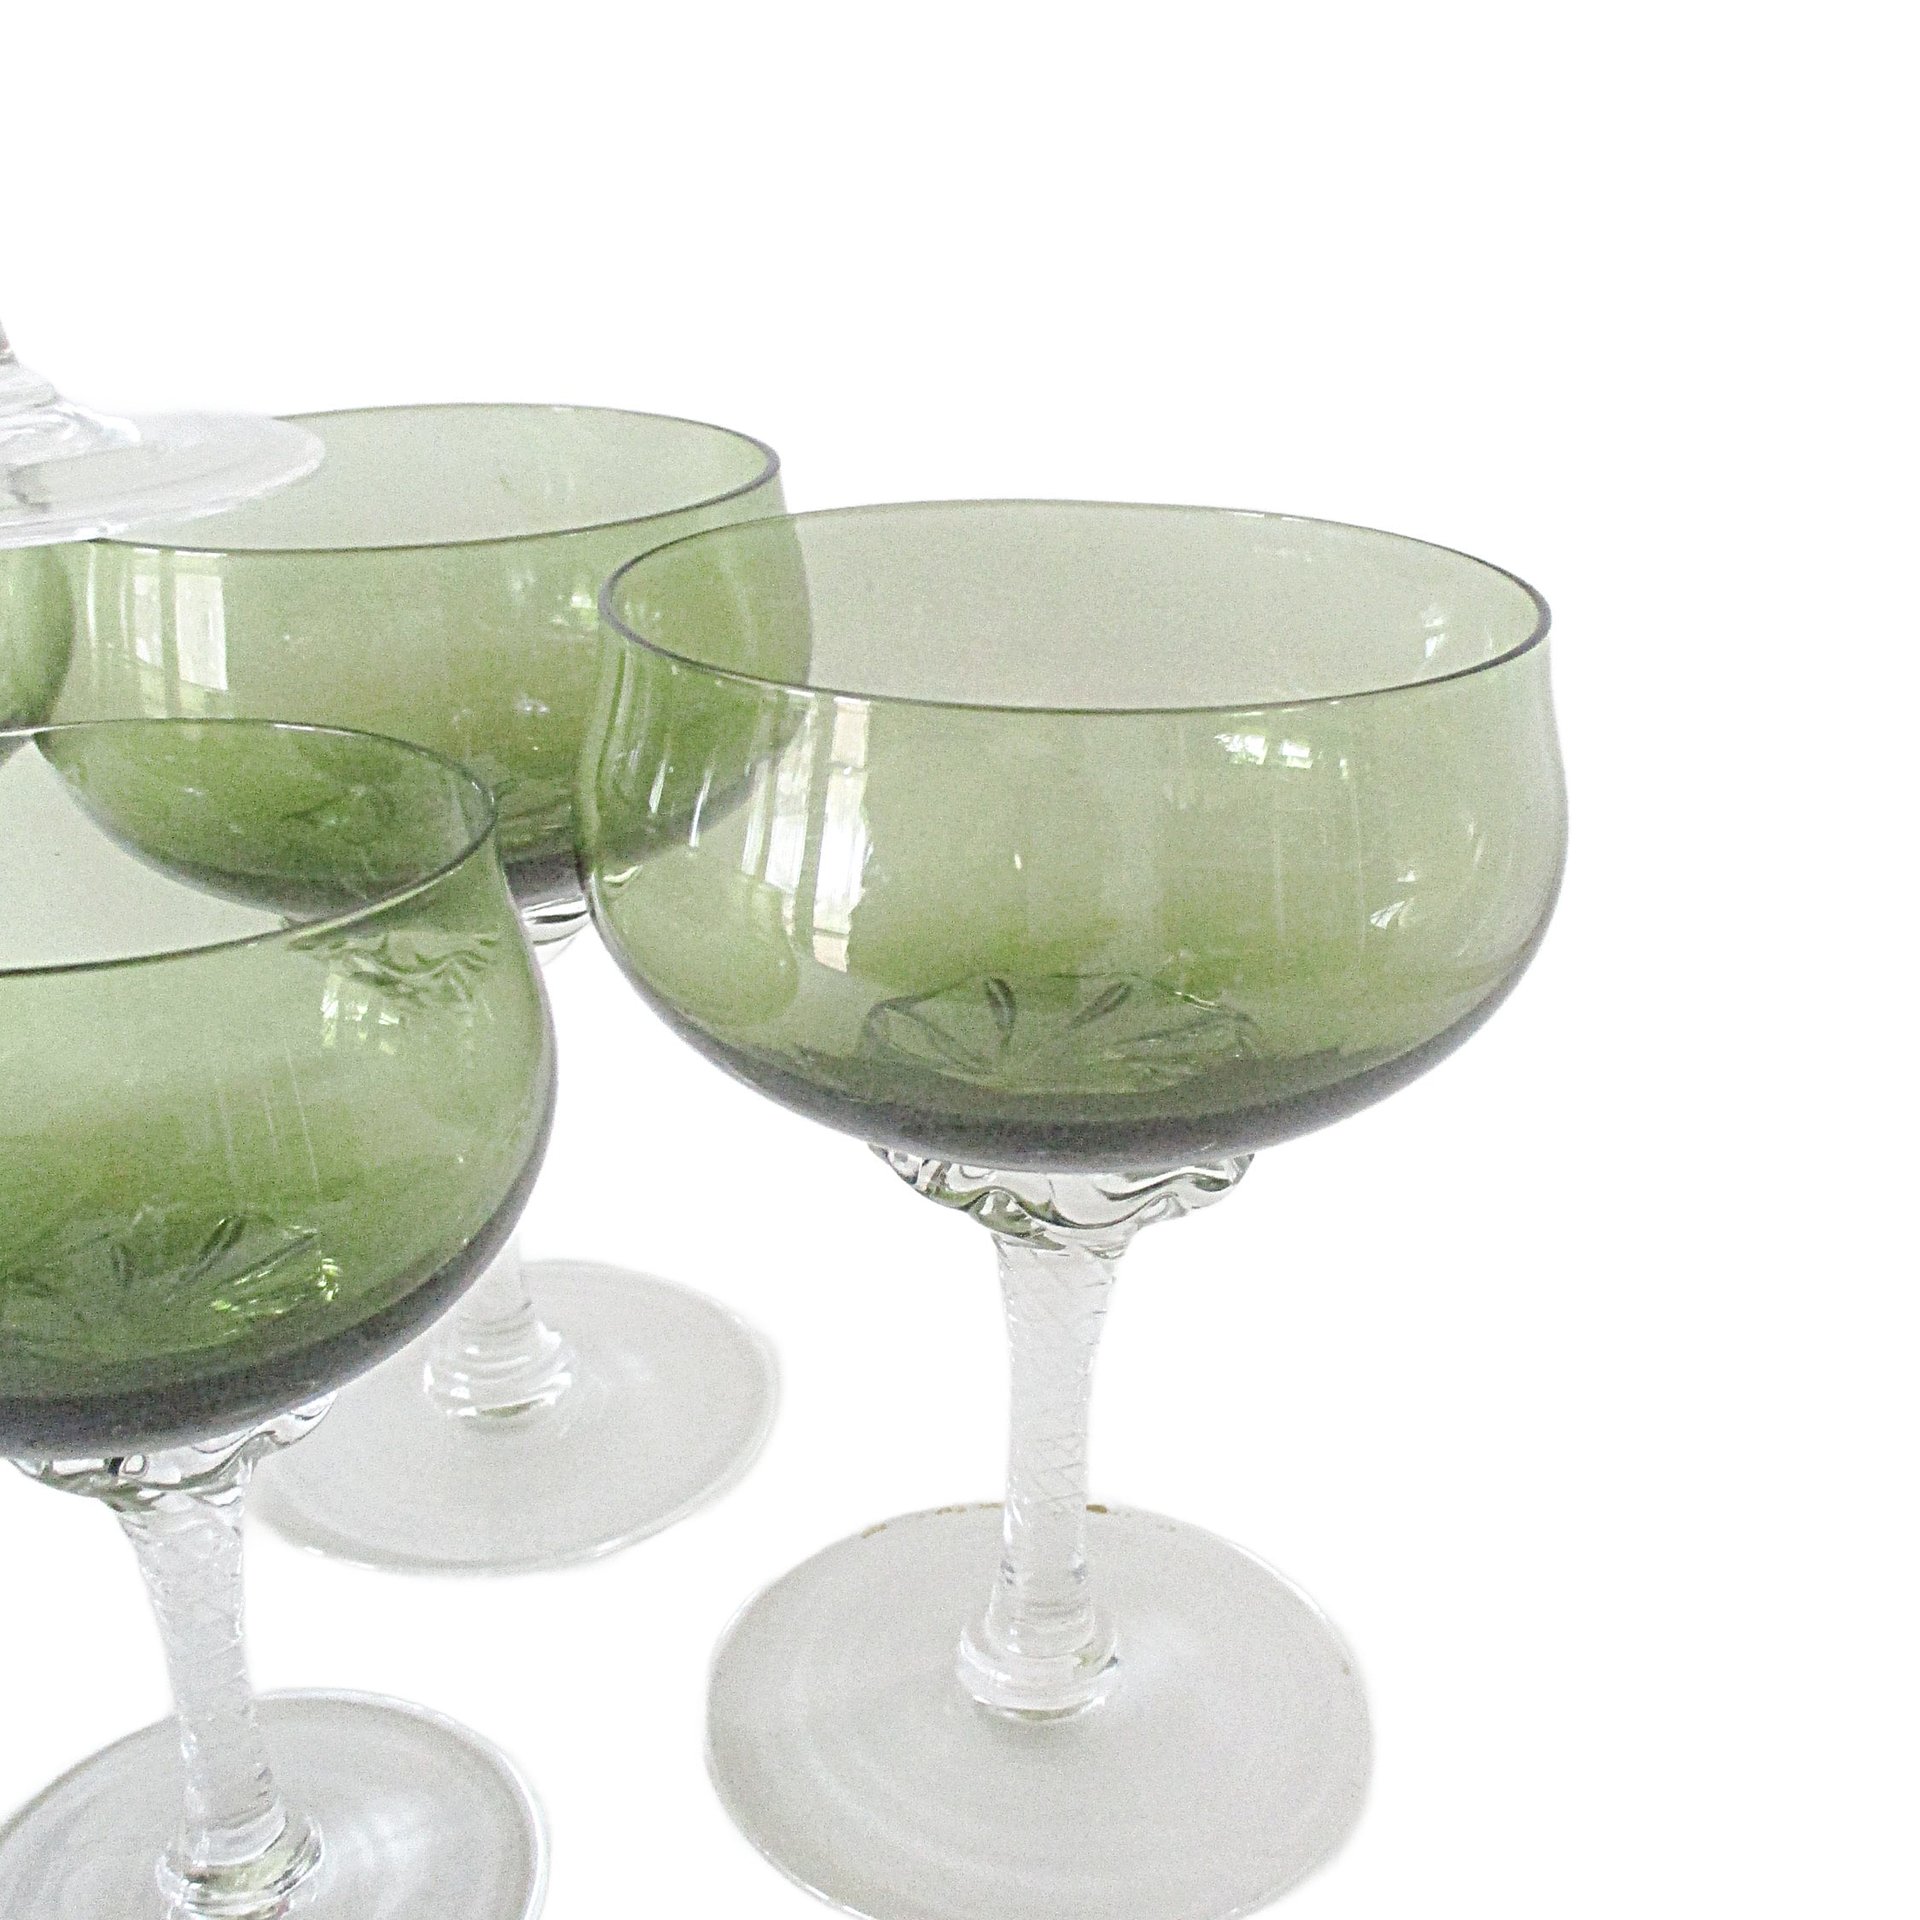 Green Champagne and Cordial Glasses, Celebrity Stemware, Wedding Gift, Gift for Wine Lovers, Toasting Glasses, Set of 7